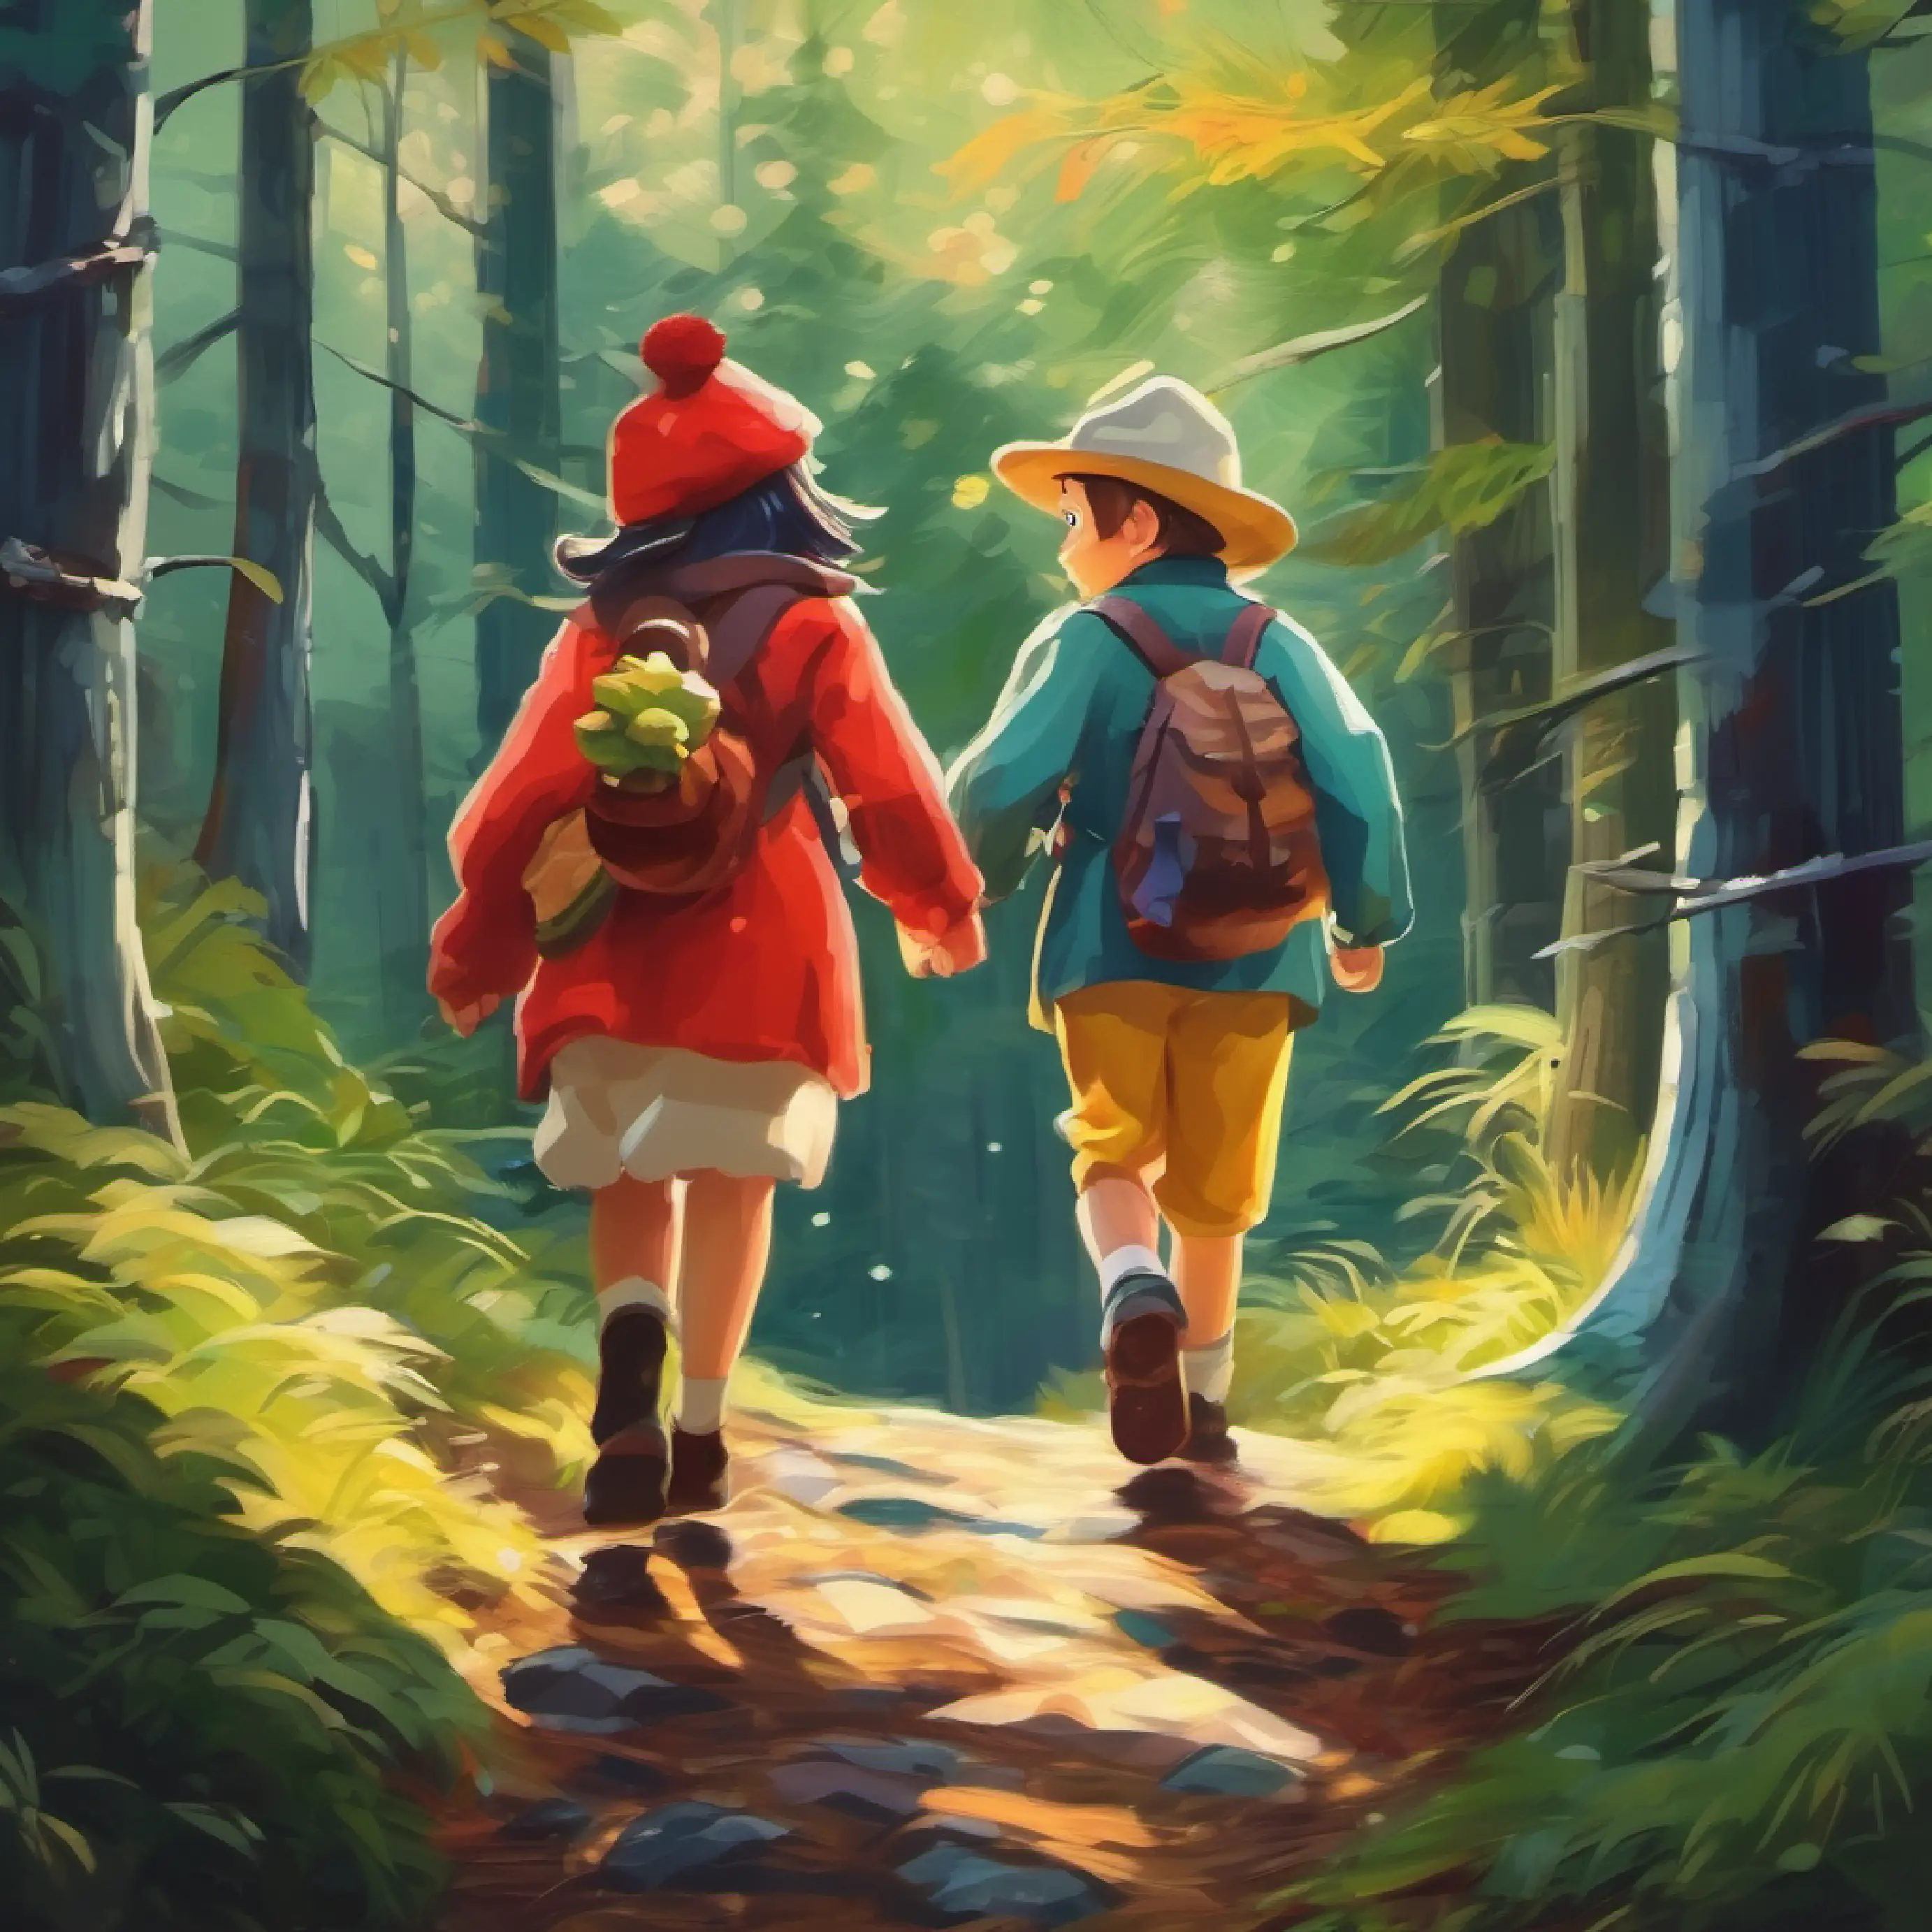 Continuing their adventure, they walk deeper into the woods.